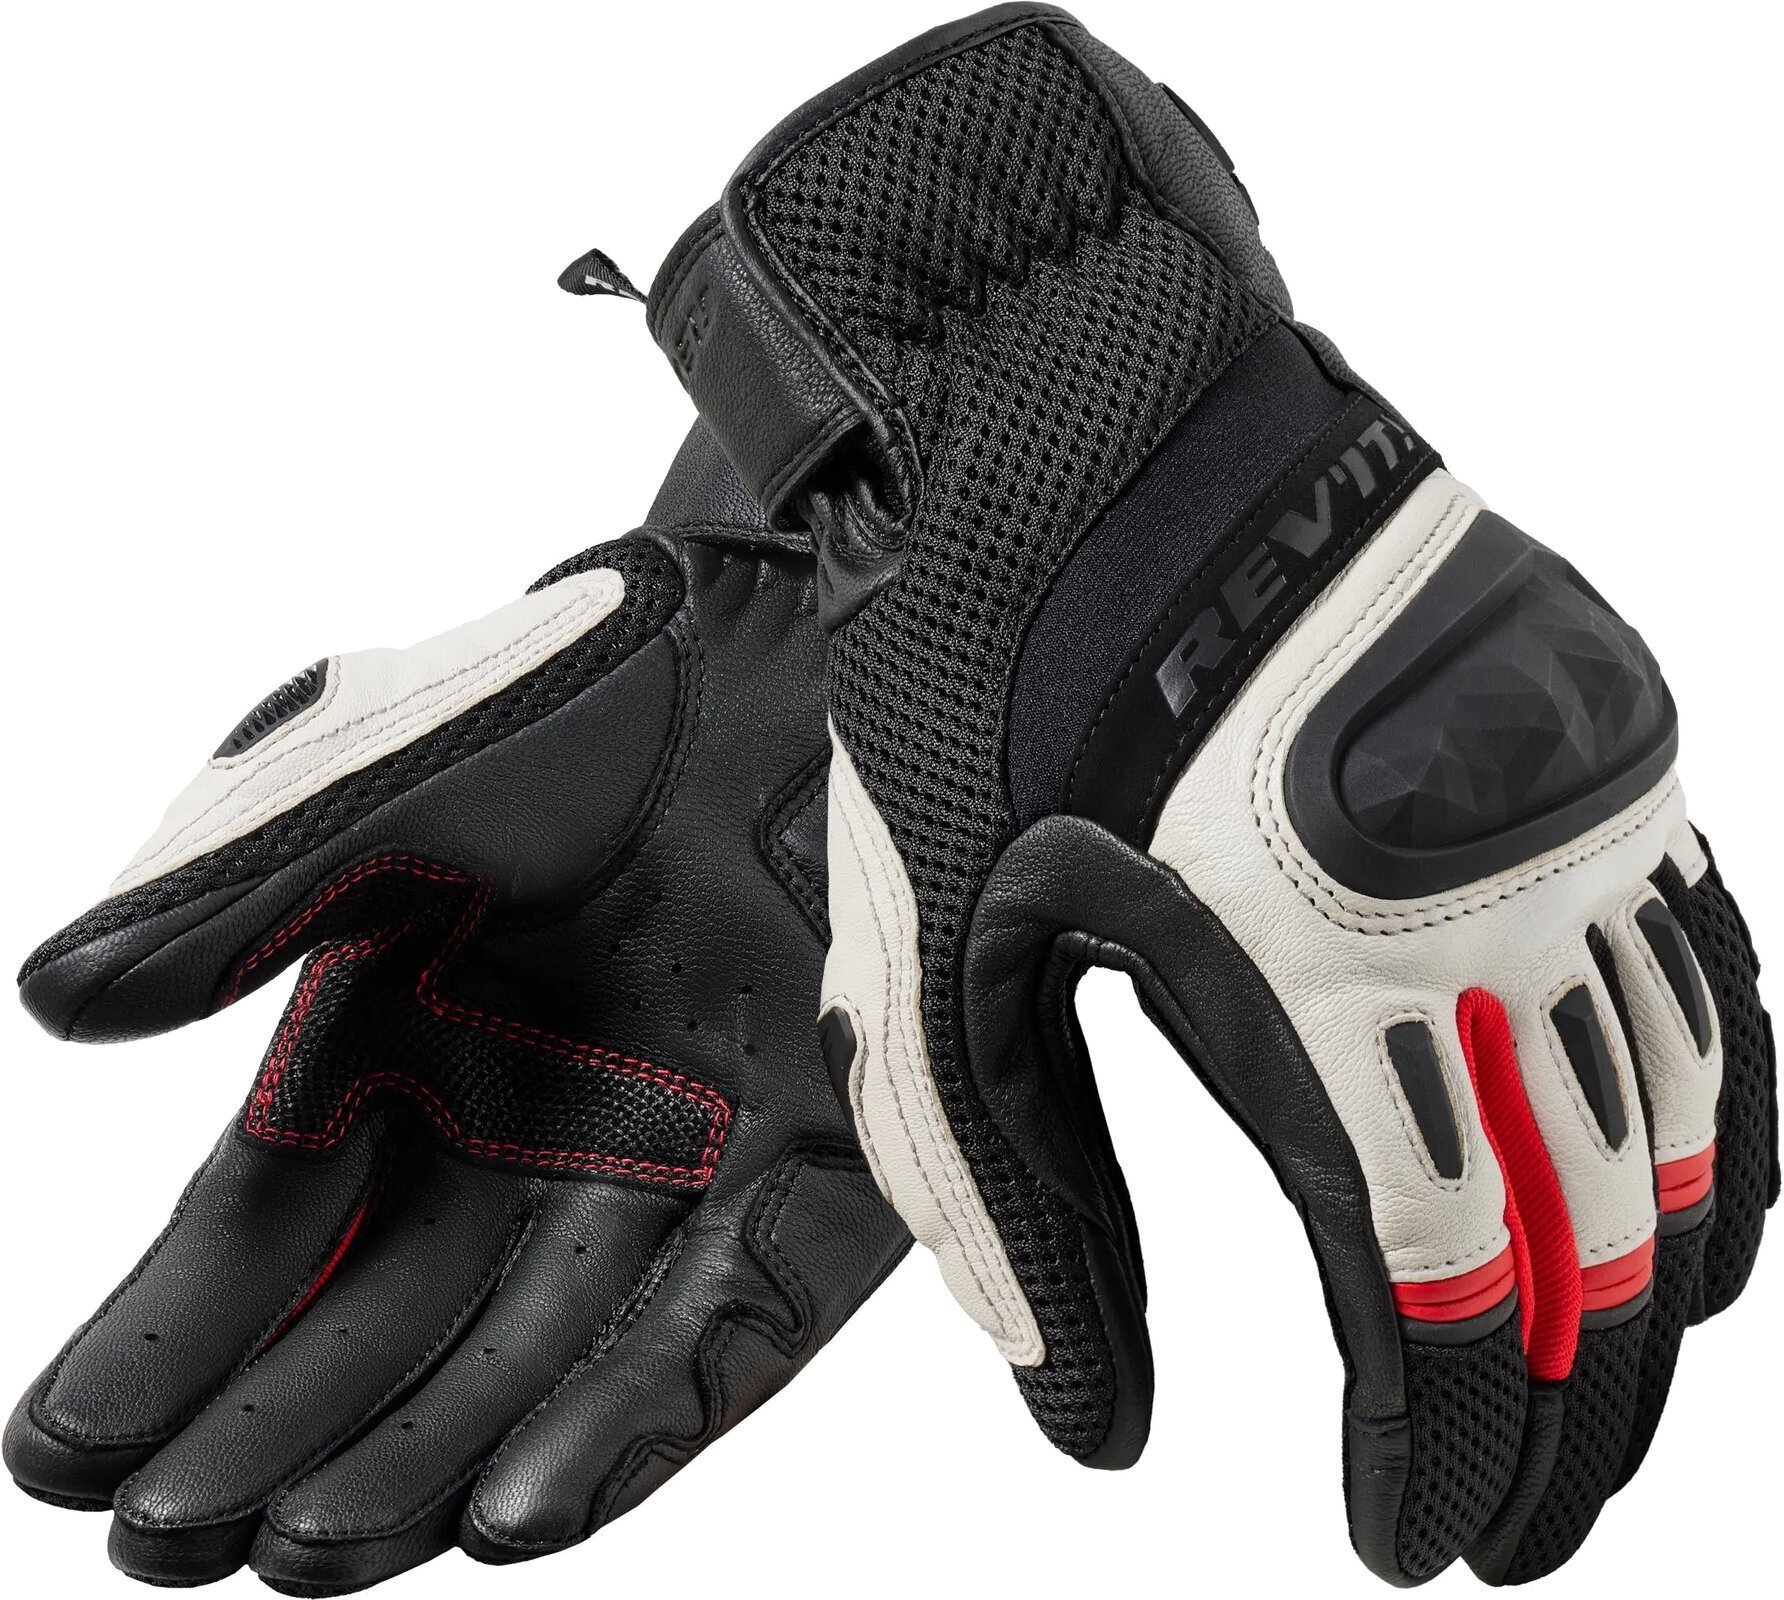 Motorcycle Gloves Rev'it! Gloves Dirt 4 Black/Red 2XL Motorcycle Gloves